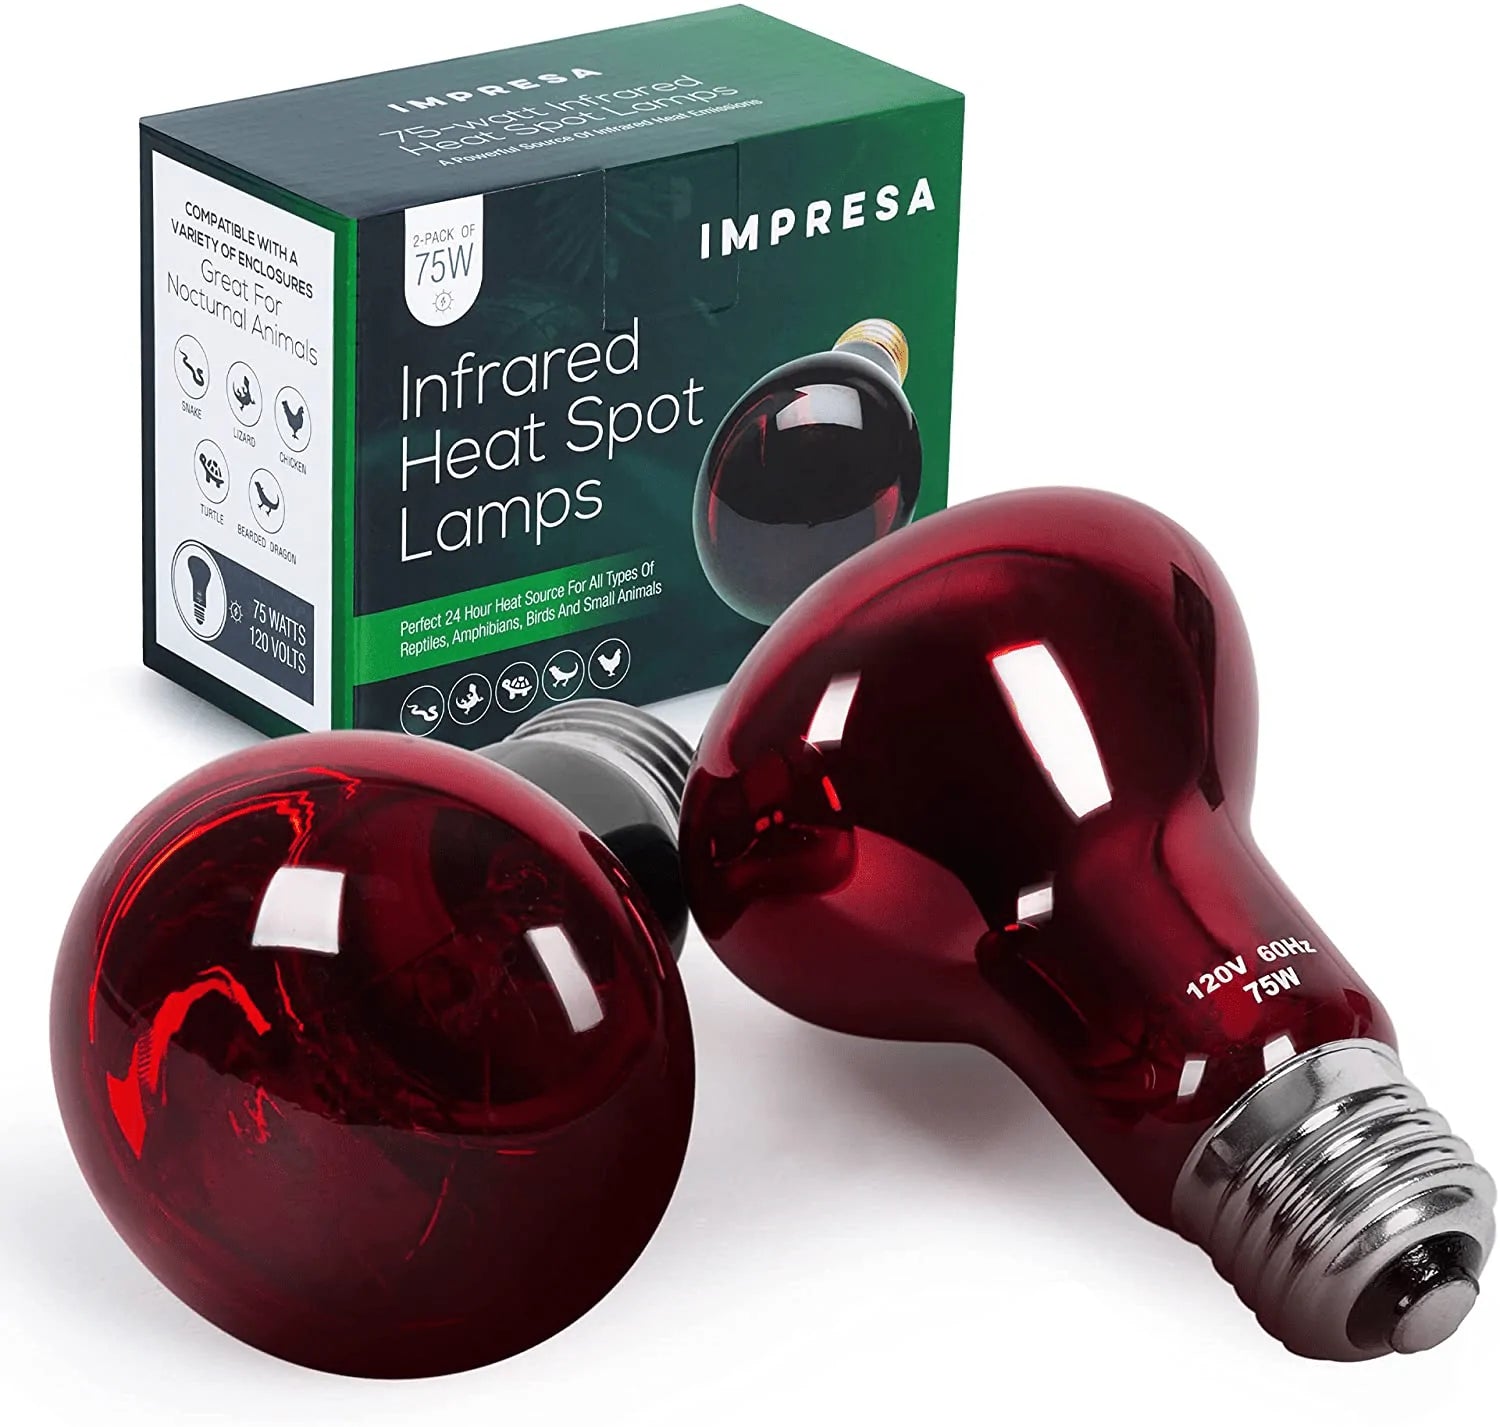 [2-Pack]‌ ‌75‌ ‌Watt‌ ‌Infrared‌ ‌Heat‌ ‌Lamp Bulb‌ ‌For‌ ‌Reptiles‌ ‌-‌ ‌‌ Keeps‌ ‌Your‌ ‌Animals‌ ‌Warm‌ ‌-‌ ‌Red‌ ‌Heat‌ ‌Lamp‌ ‌Bulb‌ ‌Compatible‌ ‌With‌ ‌A‌ ‌Variety‌ ‌Of‌ ‌Enclosures‌ Animals & Pet Supplies > Pet Supplies > Reptile & Amphibian Supplies > Reptile & Amphibian Habitat Heating & Lighting Impresa   